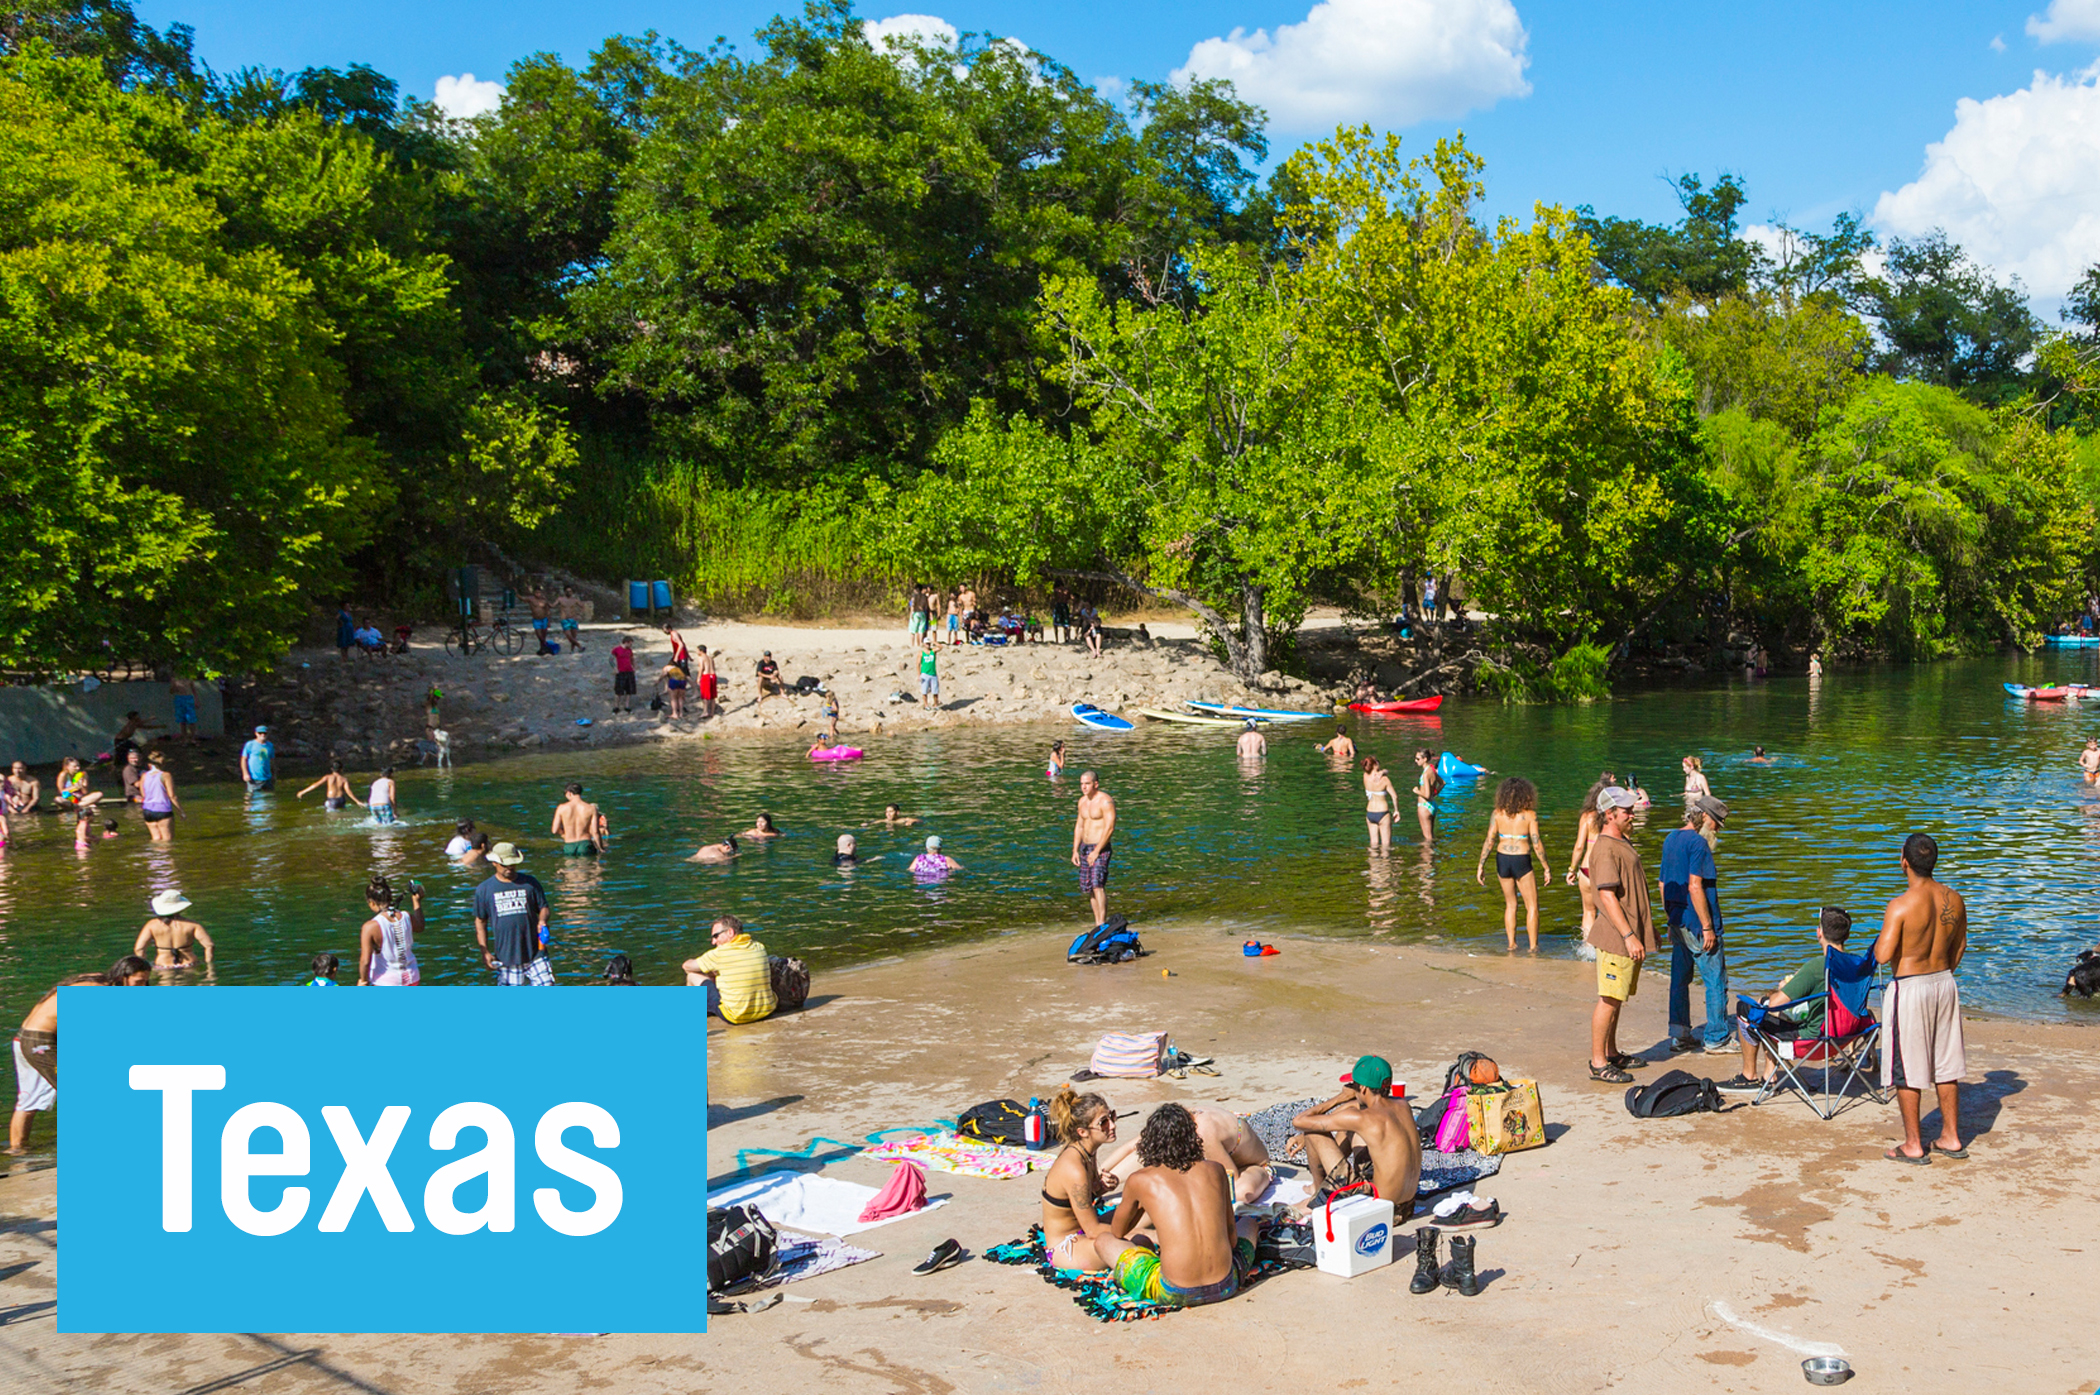 Cool off with a swim in Austin’s <a href="https://austintexas.gov/department/barton-springs-pool" target="_blank">Barton Springs Pool</a>. Admission is free from 5-8 a.m. and again from 9-10 p.m.